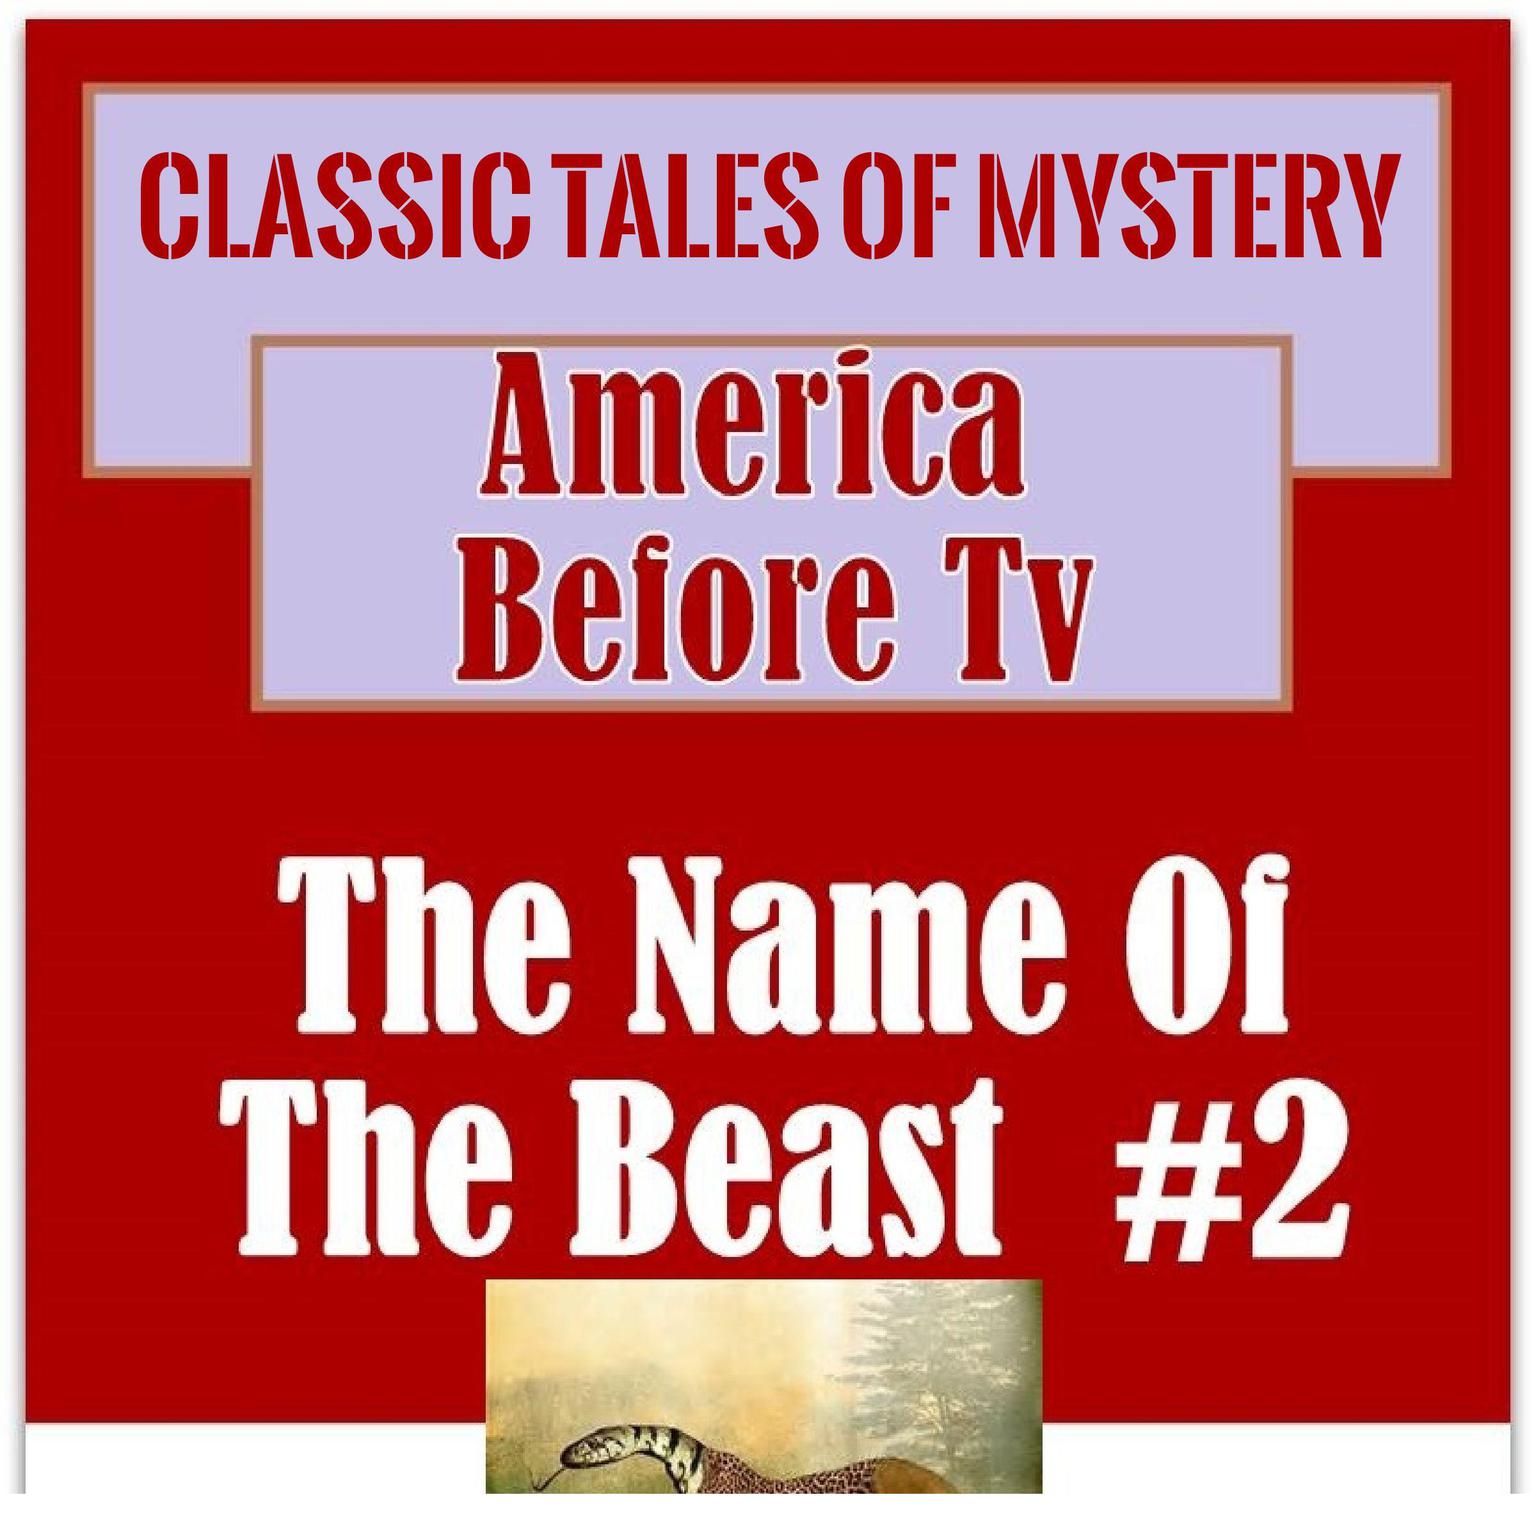 America Before TV - The Name Of The Beast  #2 (Abridged) Audiobook, by Classic Tales of Mystery